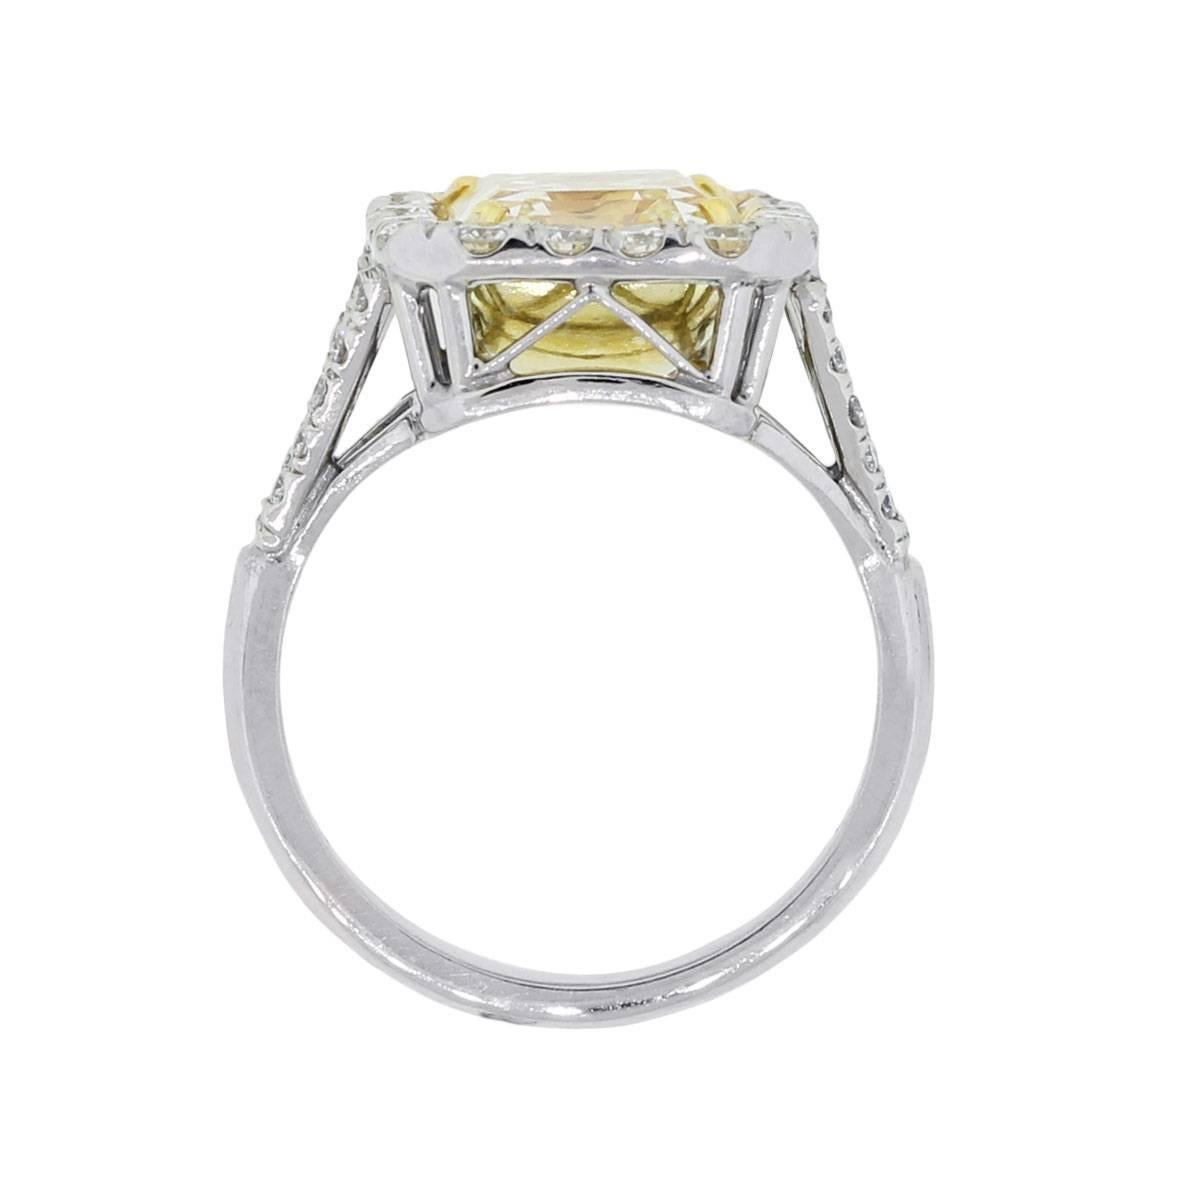 Material: Platinum and 18k yellow gold
Diamond Details: Approximately 5.02ct EGL certified natural fancy yellow emerald cut diamond. Diamond is fancy yellow in color and VS2 in clarity
Other Diamond Details: Approximately 0.74ctw of round brilliant